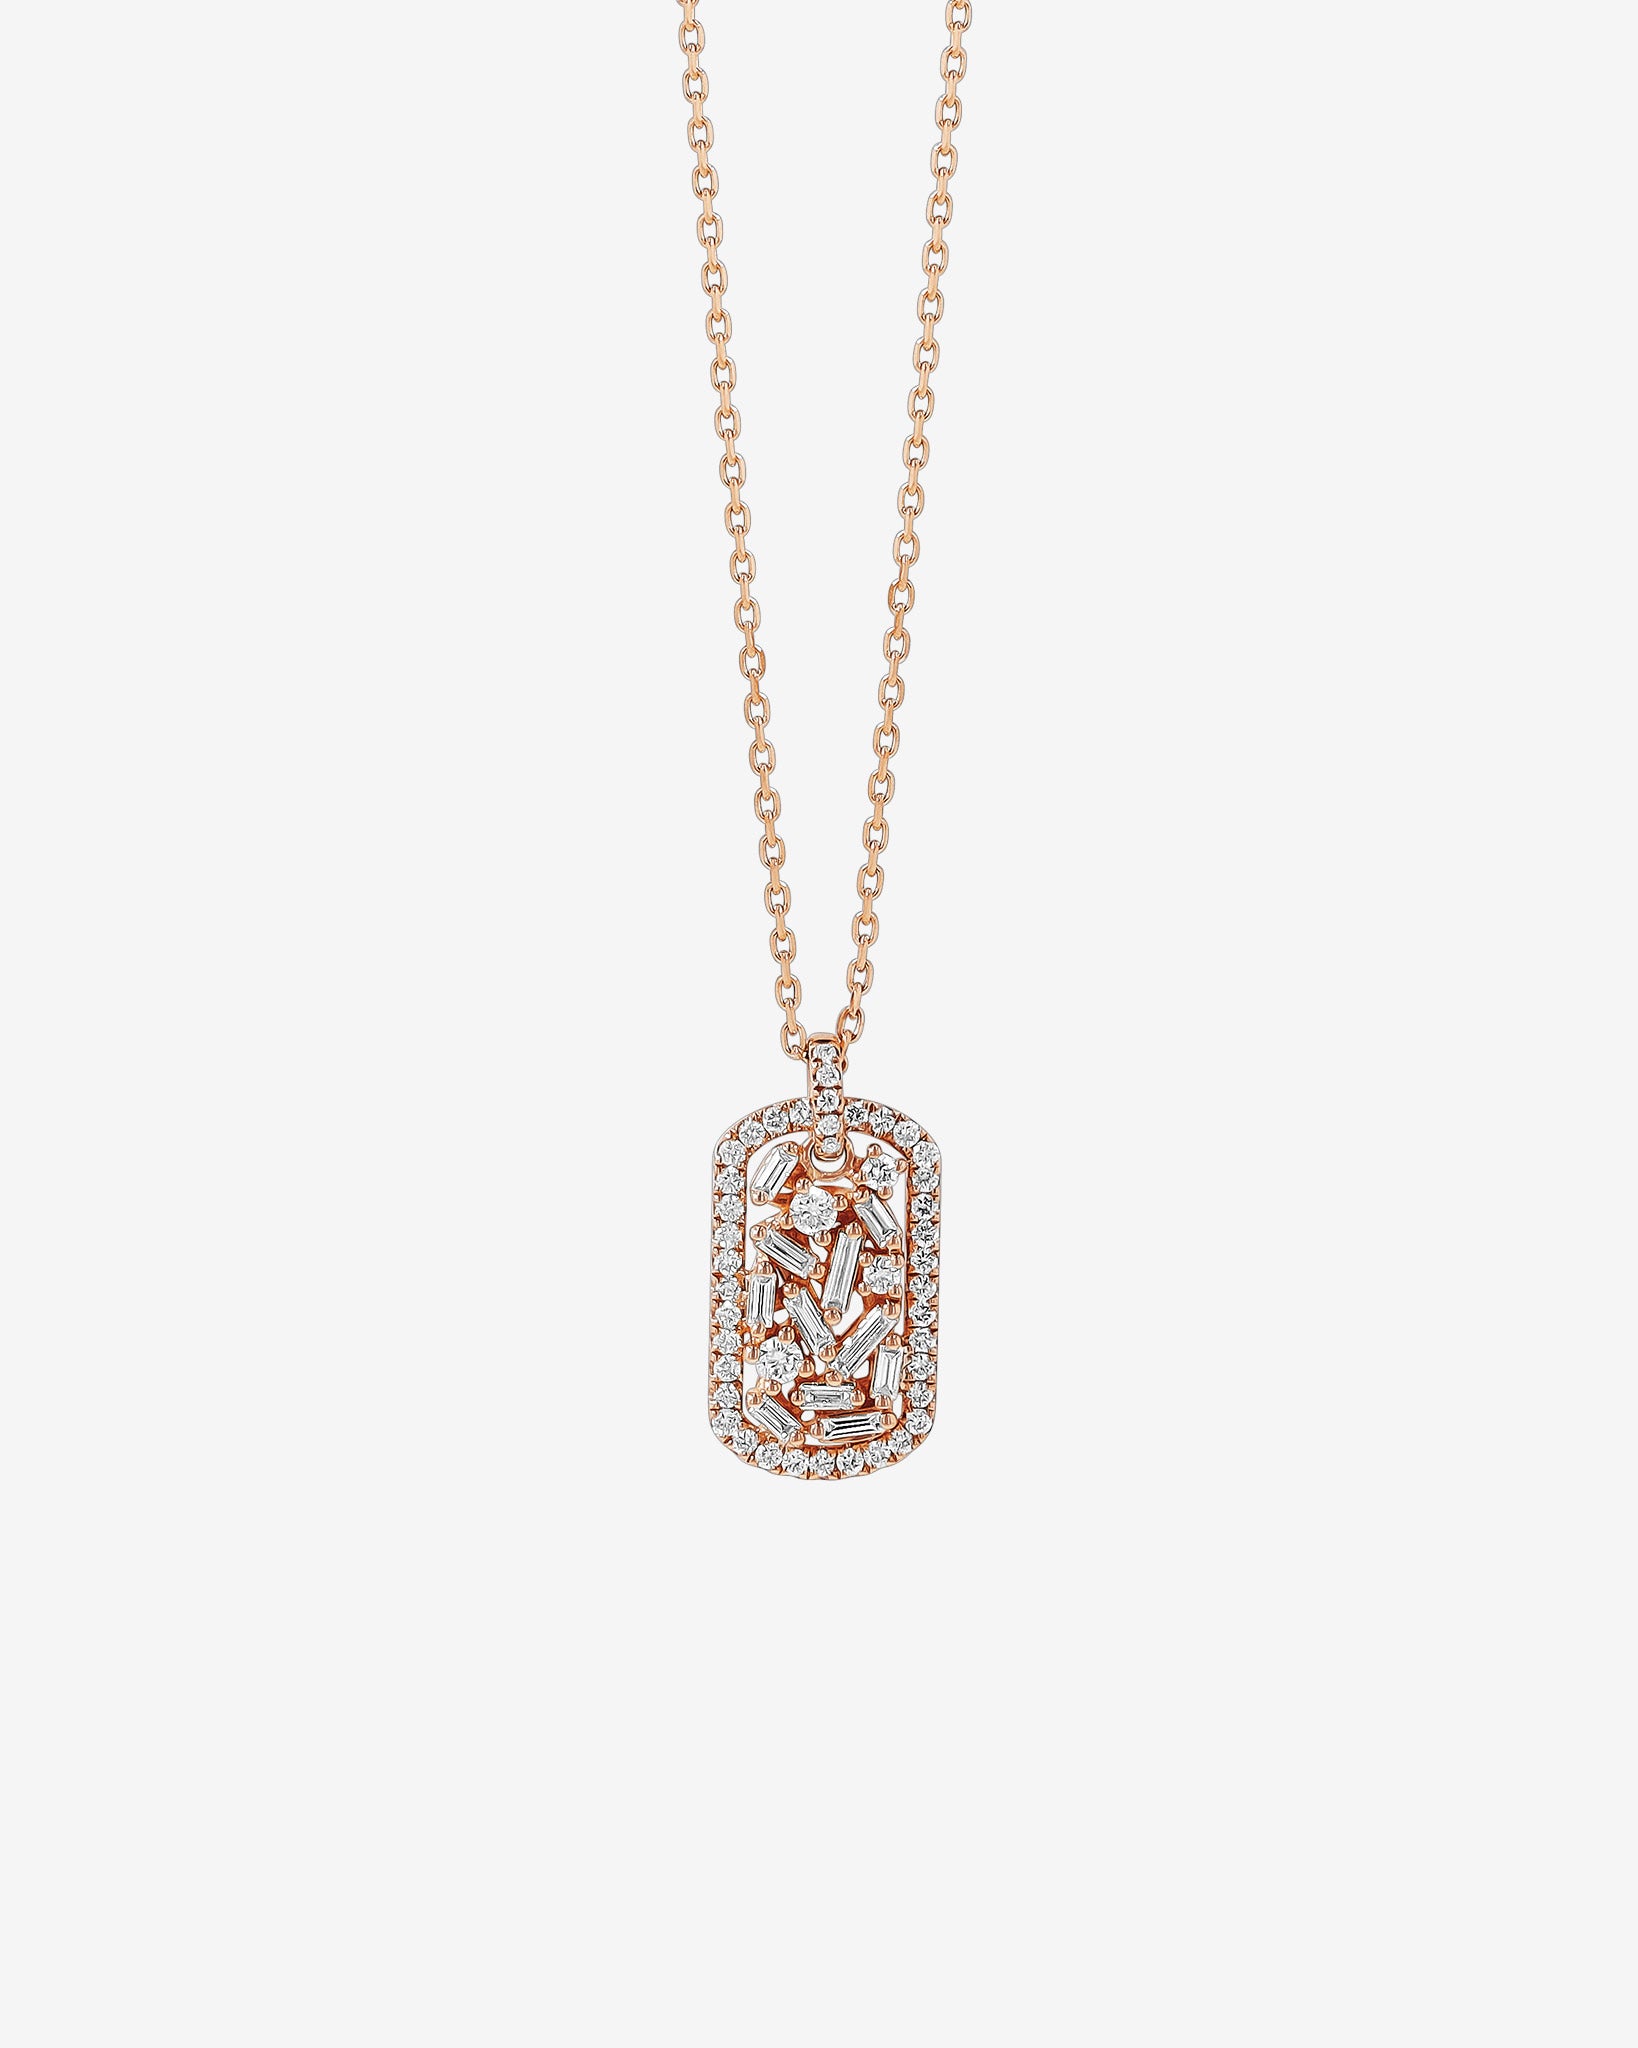 Suzanne Kalan Classic Diamond Small Dog Tag Necklace in 18k rose gold